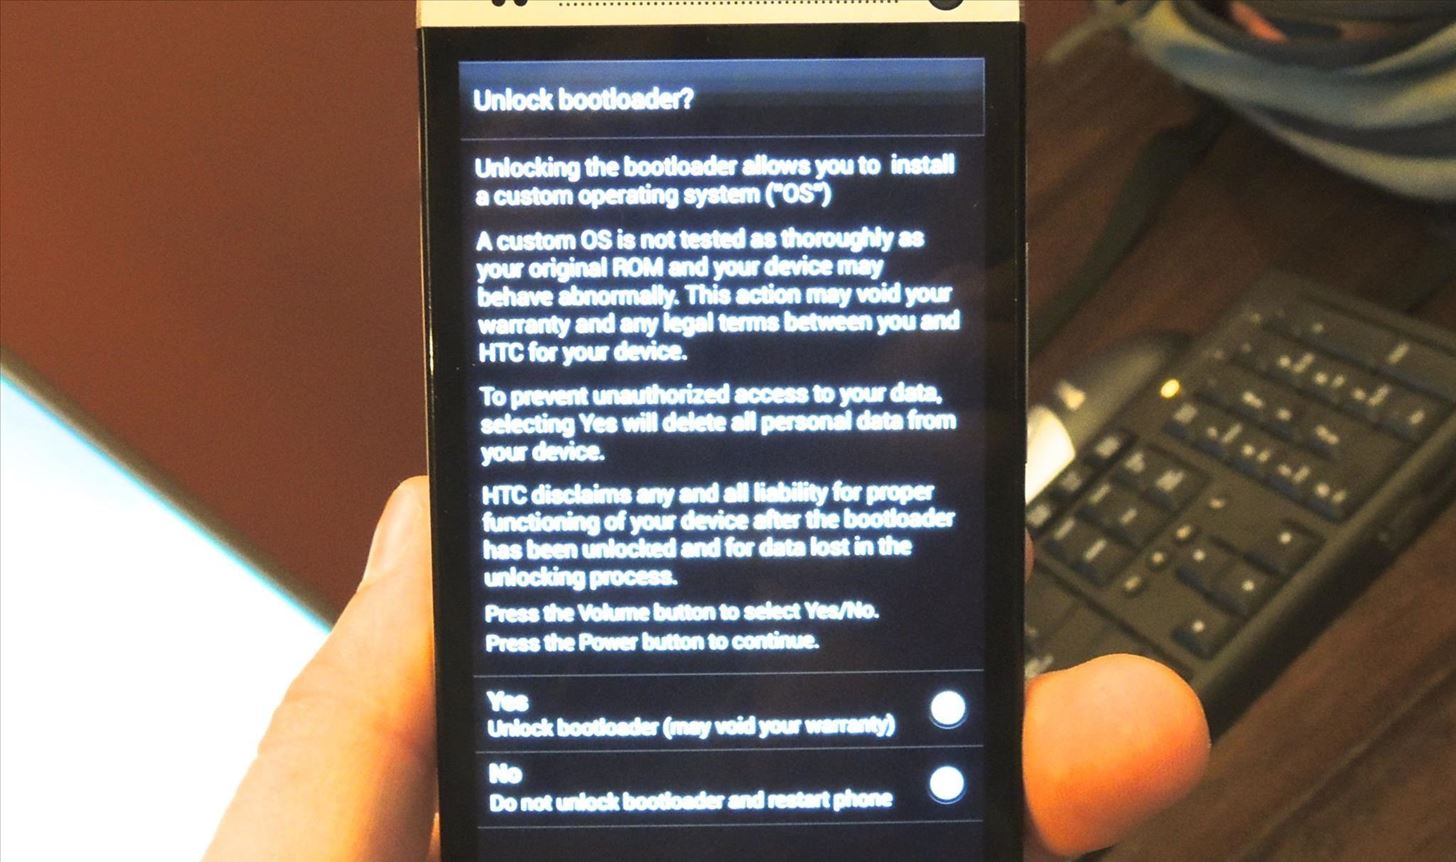 How to Install CyanogenMod on the HTC One Even Faster Now Without Rooting or Unlocking First